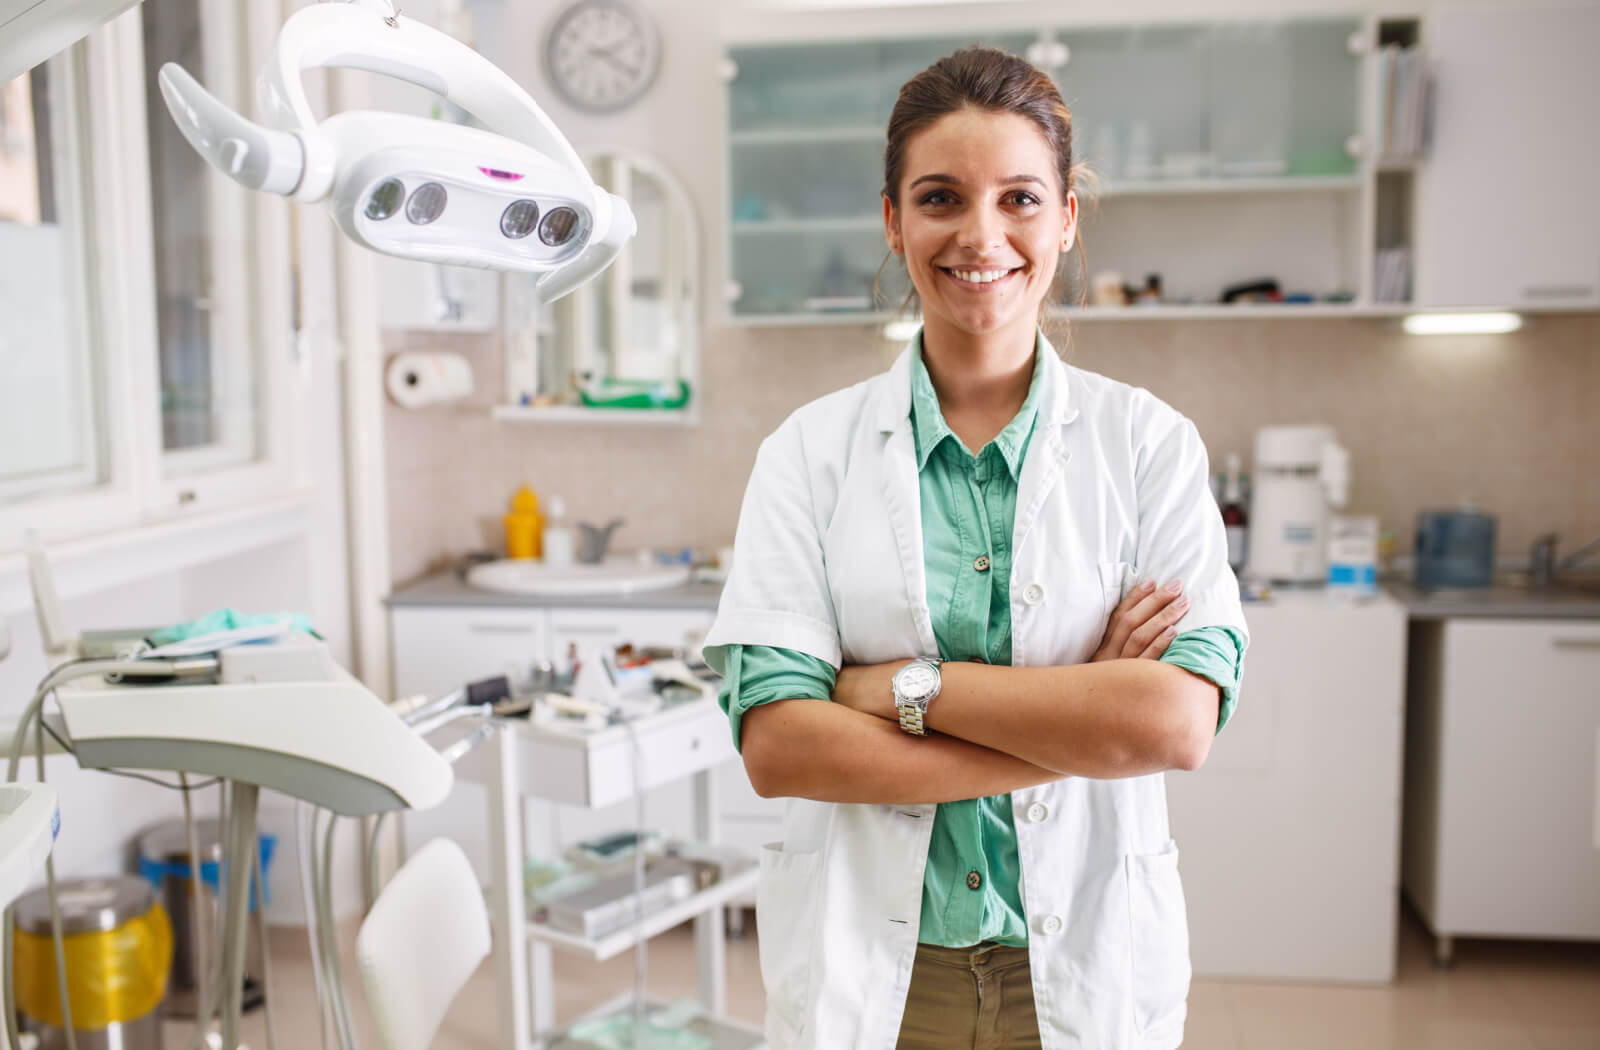 A female dentist smiling and looking directly at the camera with medical equipment in the background.
